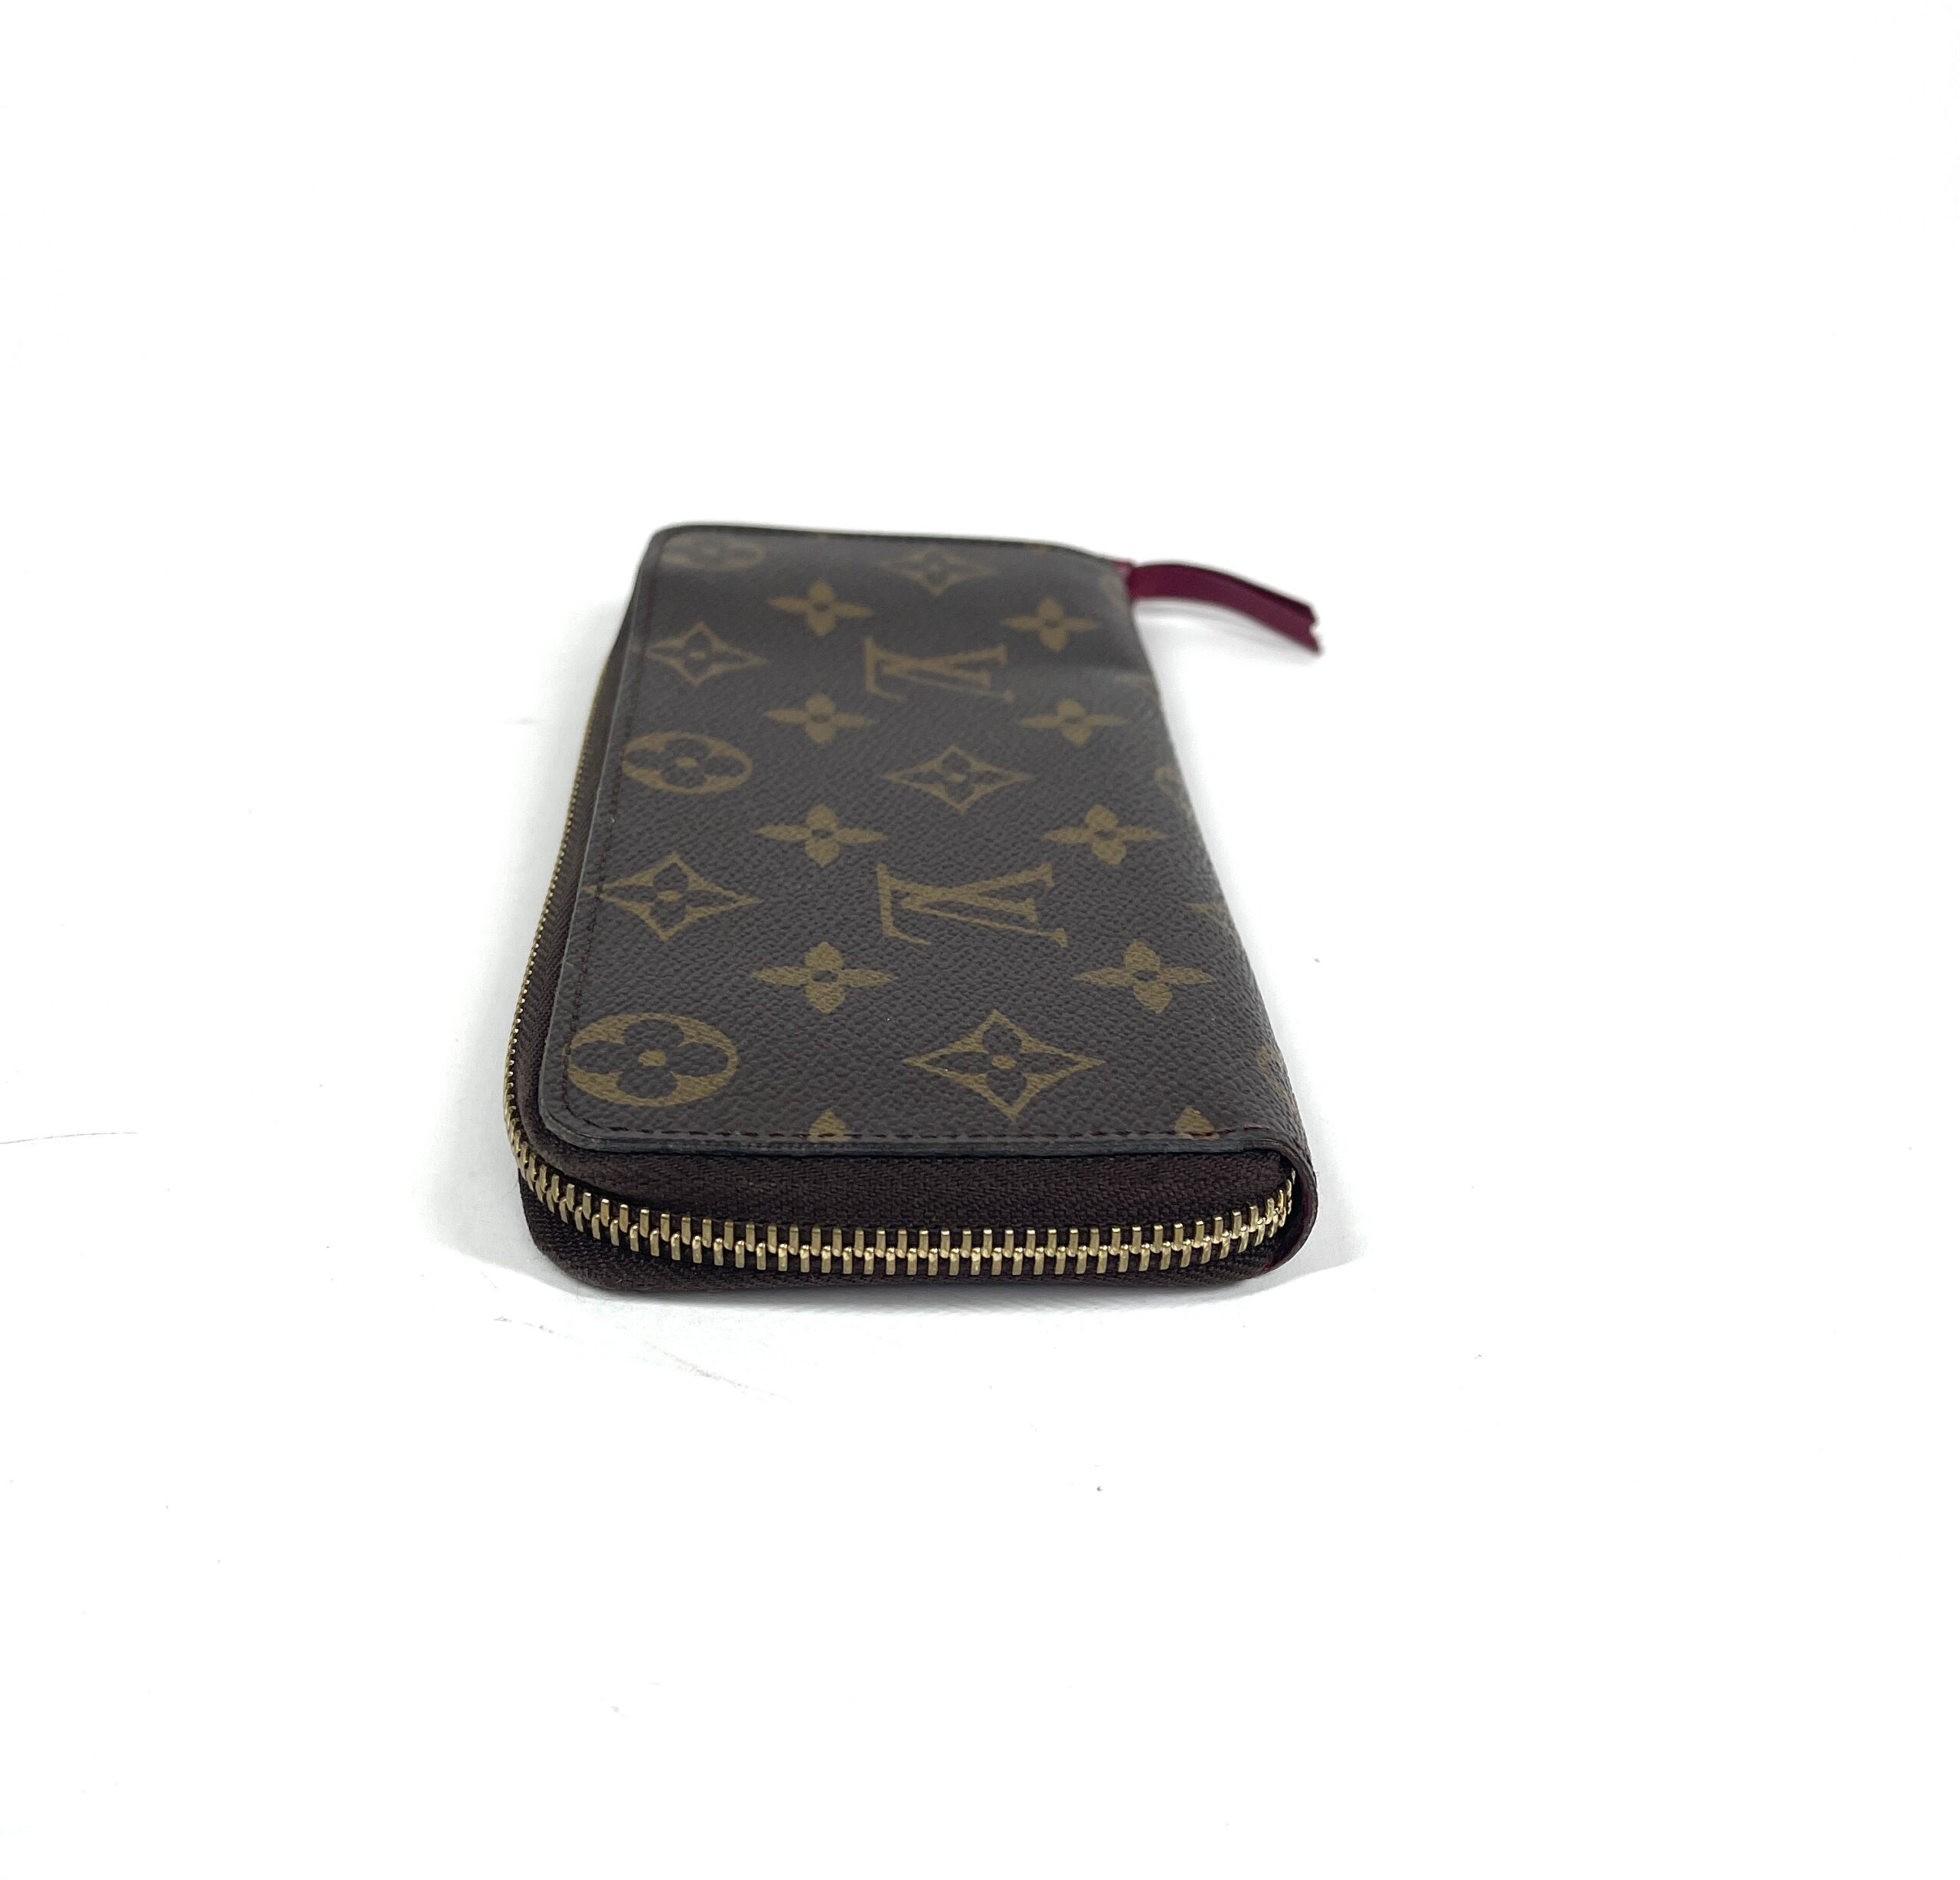 LOUIS VUITTON CLEMENCE WALLET 1 YR REVIEW